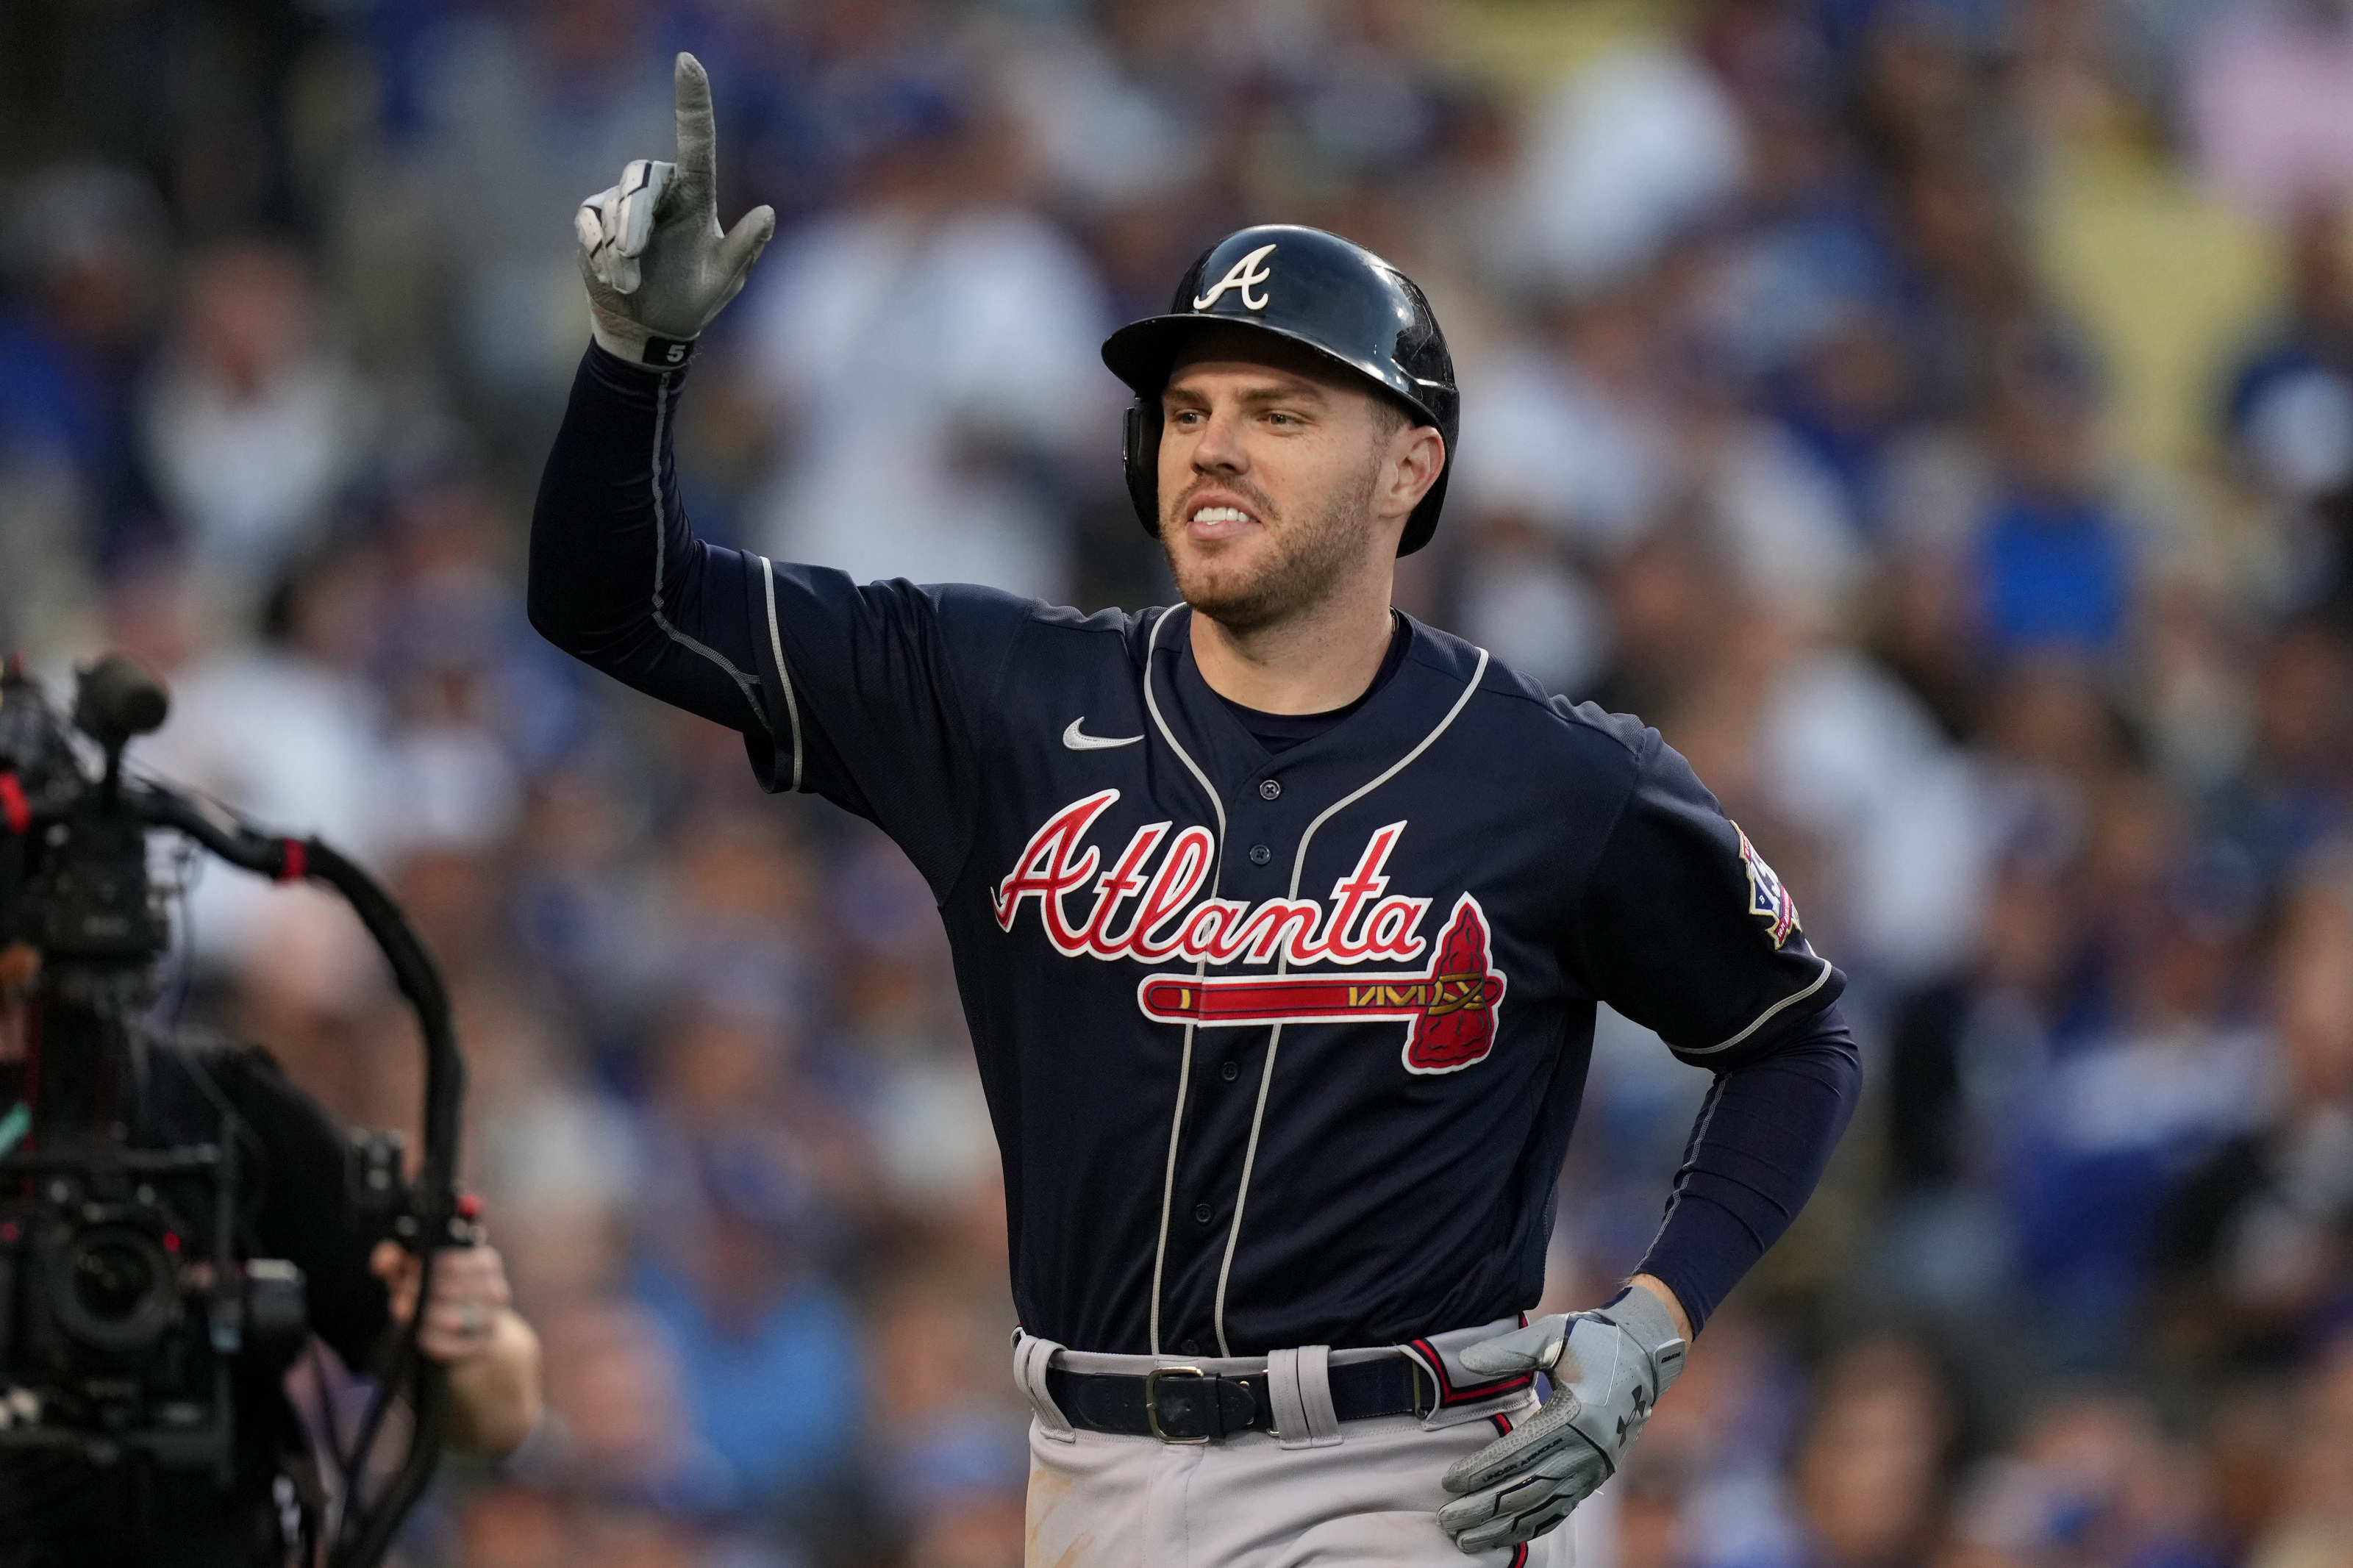 The Detroit Tigers signing Freddie Freeman would be a dream come true